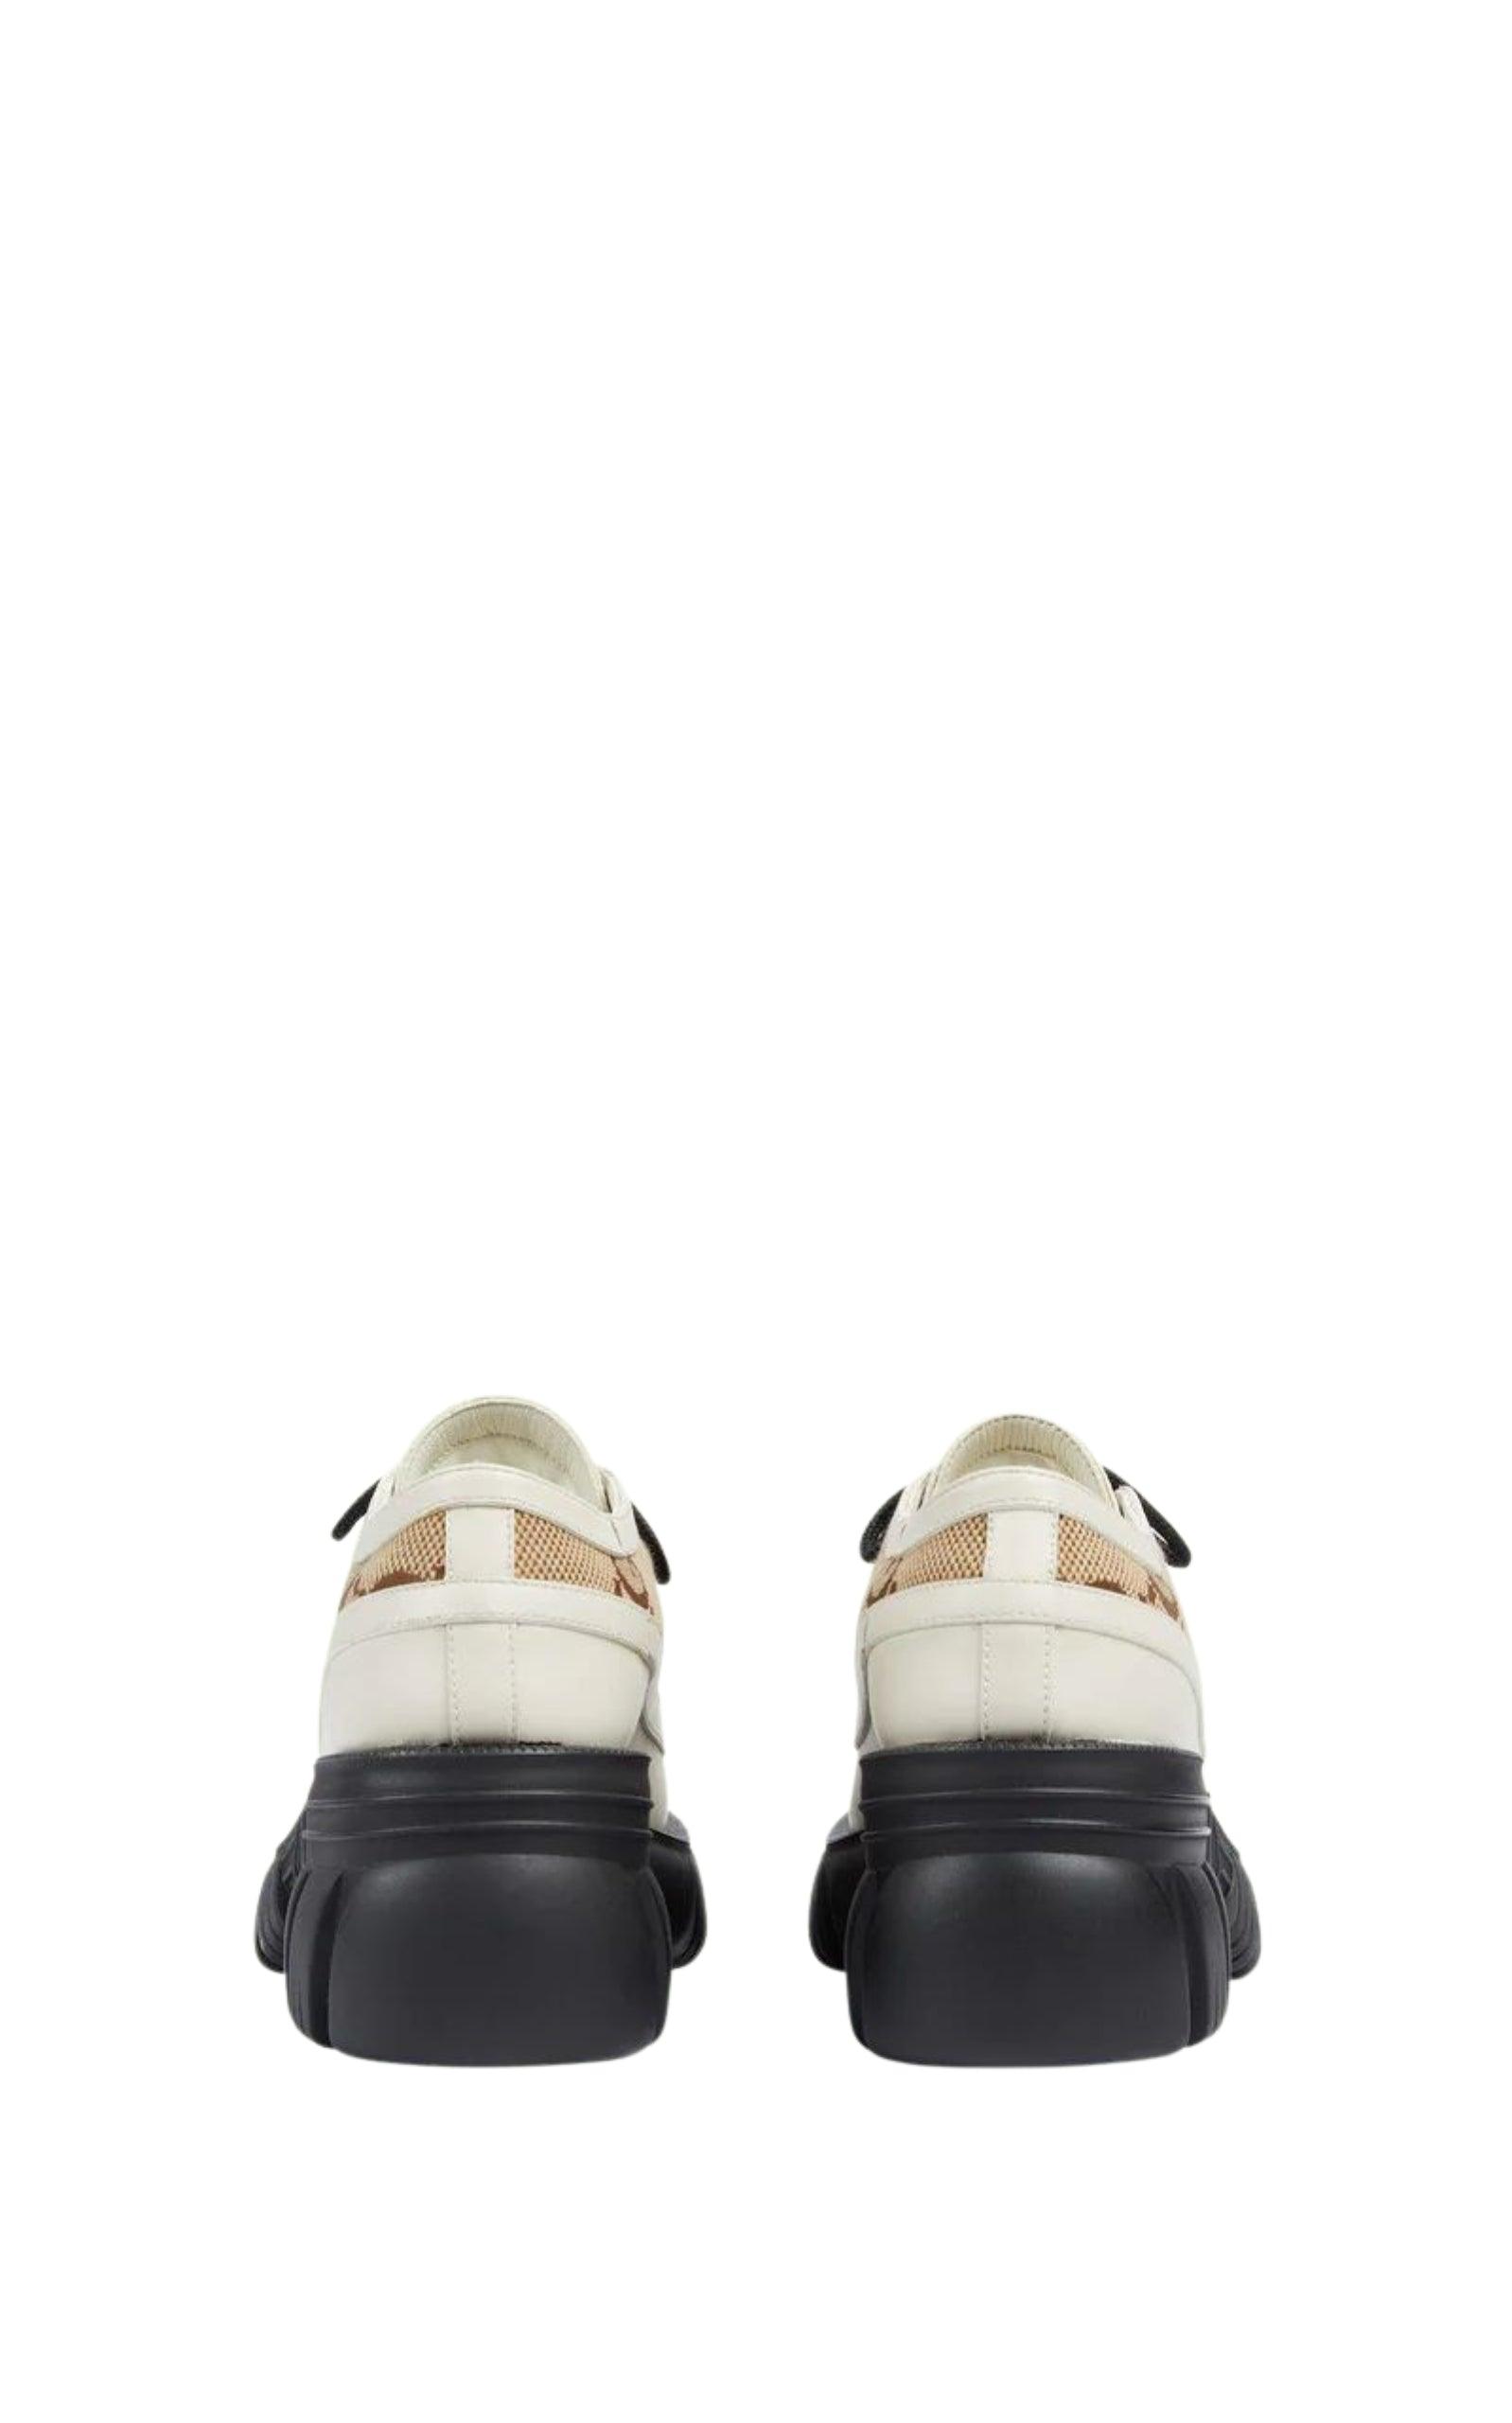 Gucci GG panelled leather sneakers - White